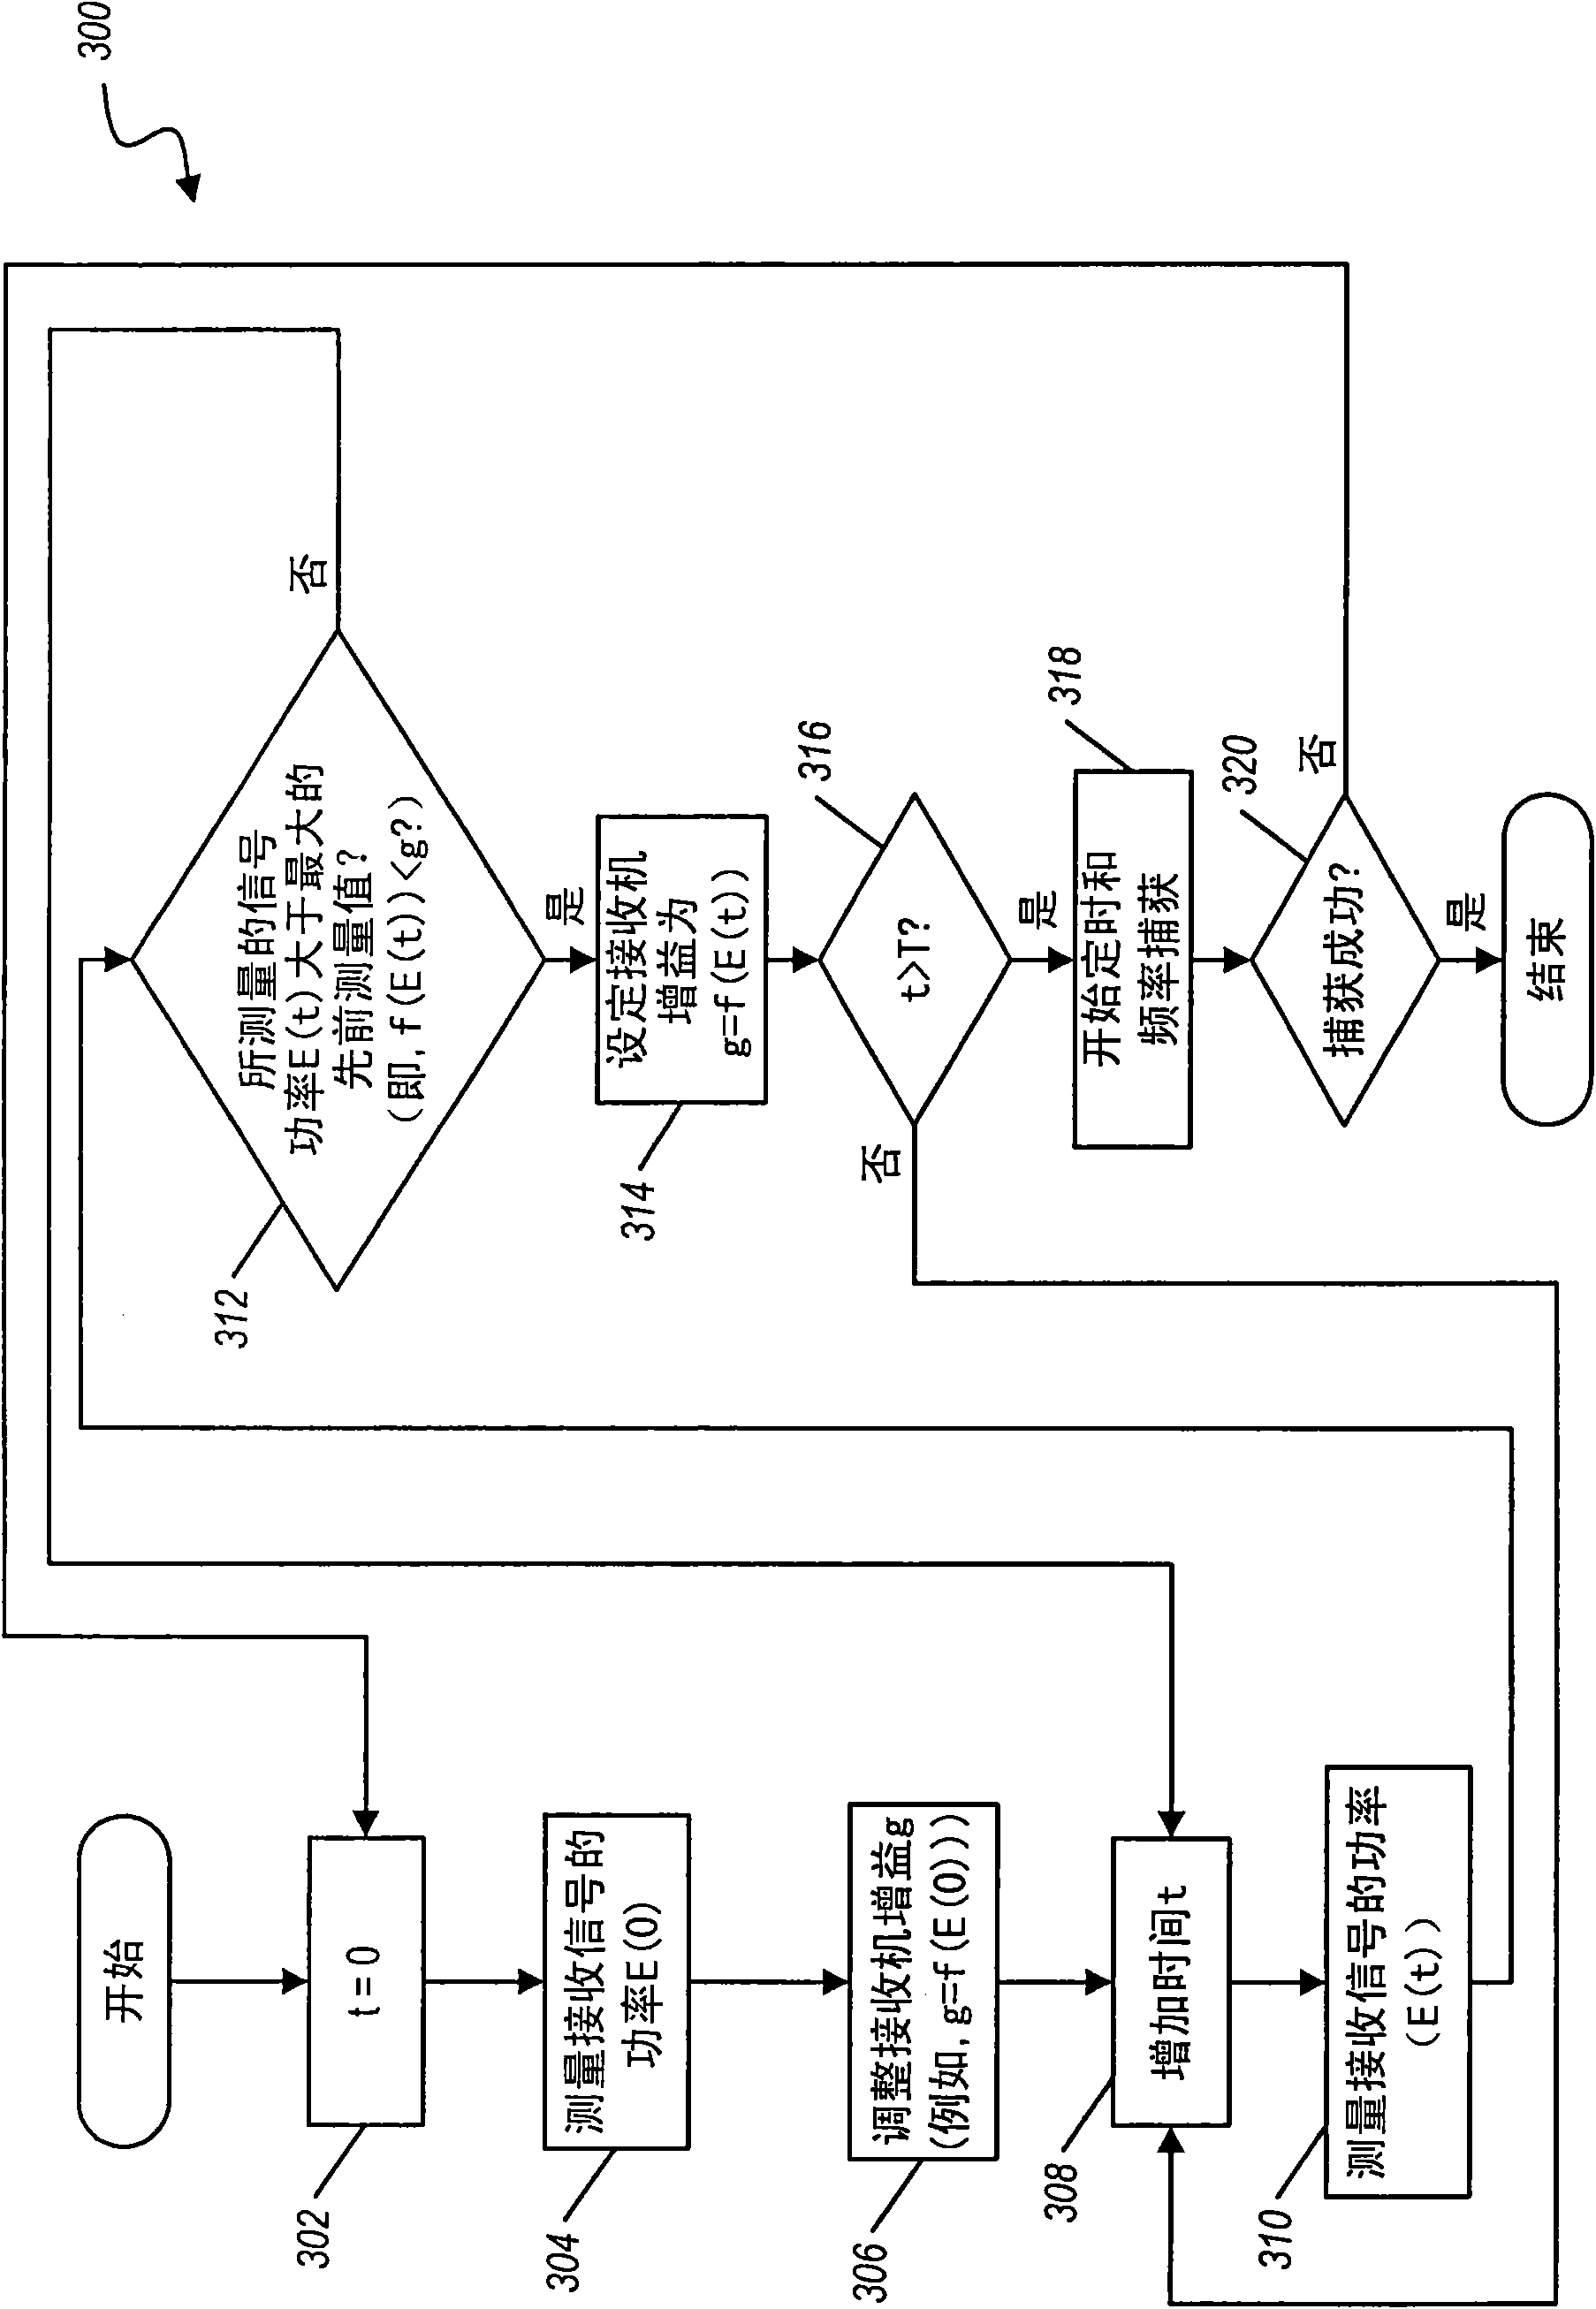 Methods and apparatus for initial acquisition gain control in a communication system